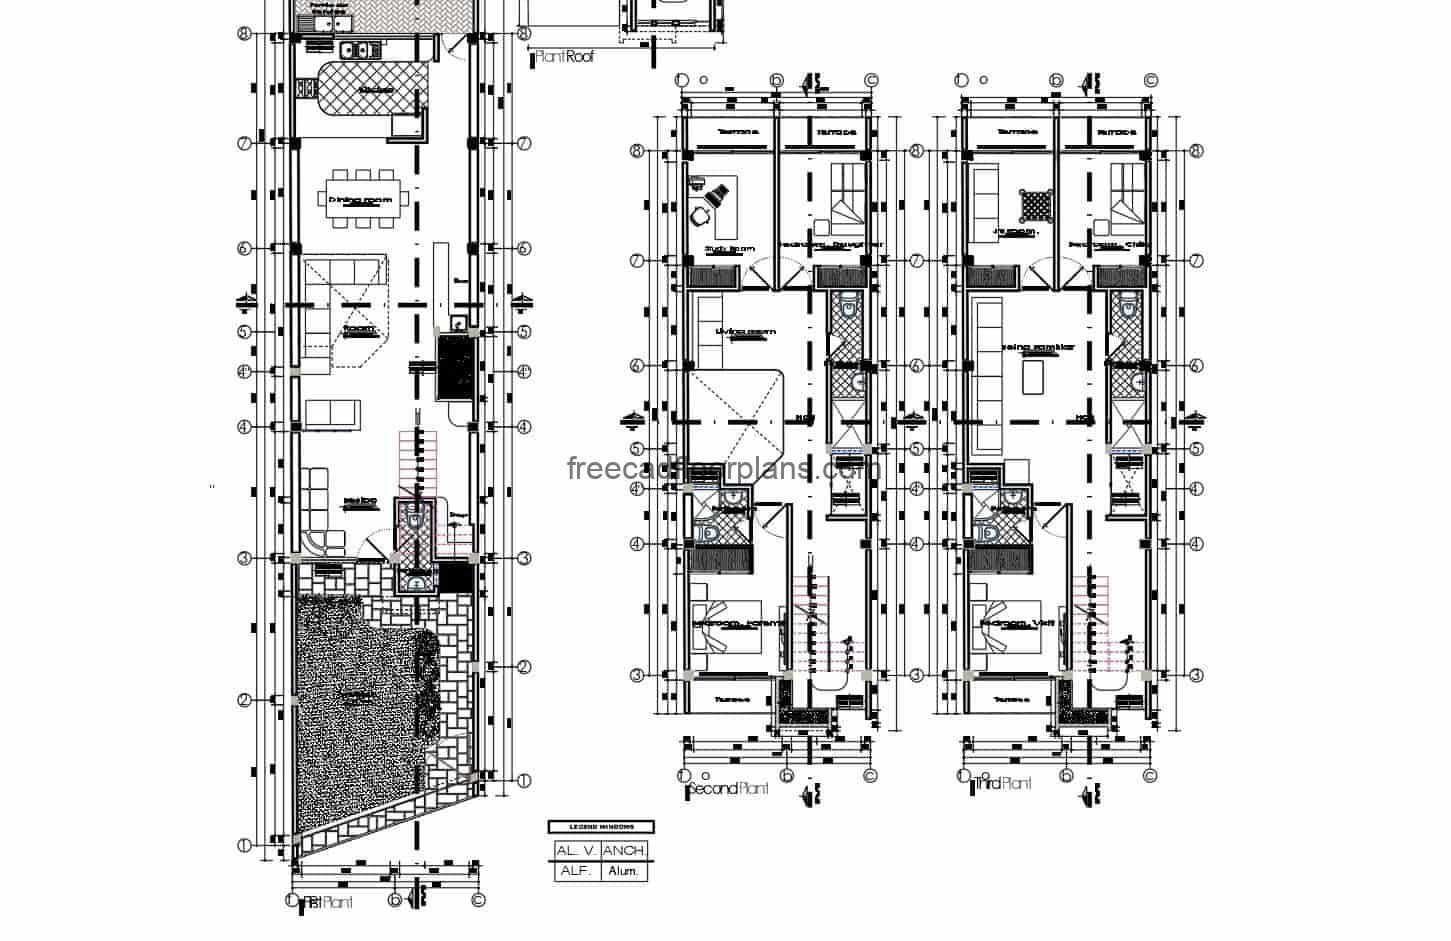 Three-level elongated residence Plans with elevations and sections for free download in autocad, editable blocks in DWG, free residence blueprints